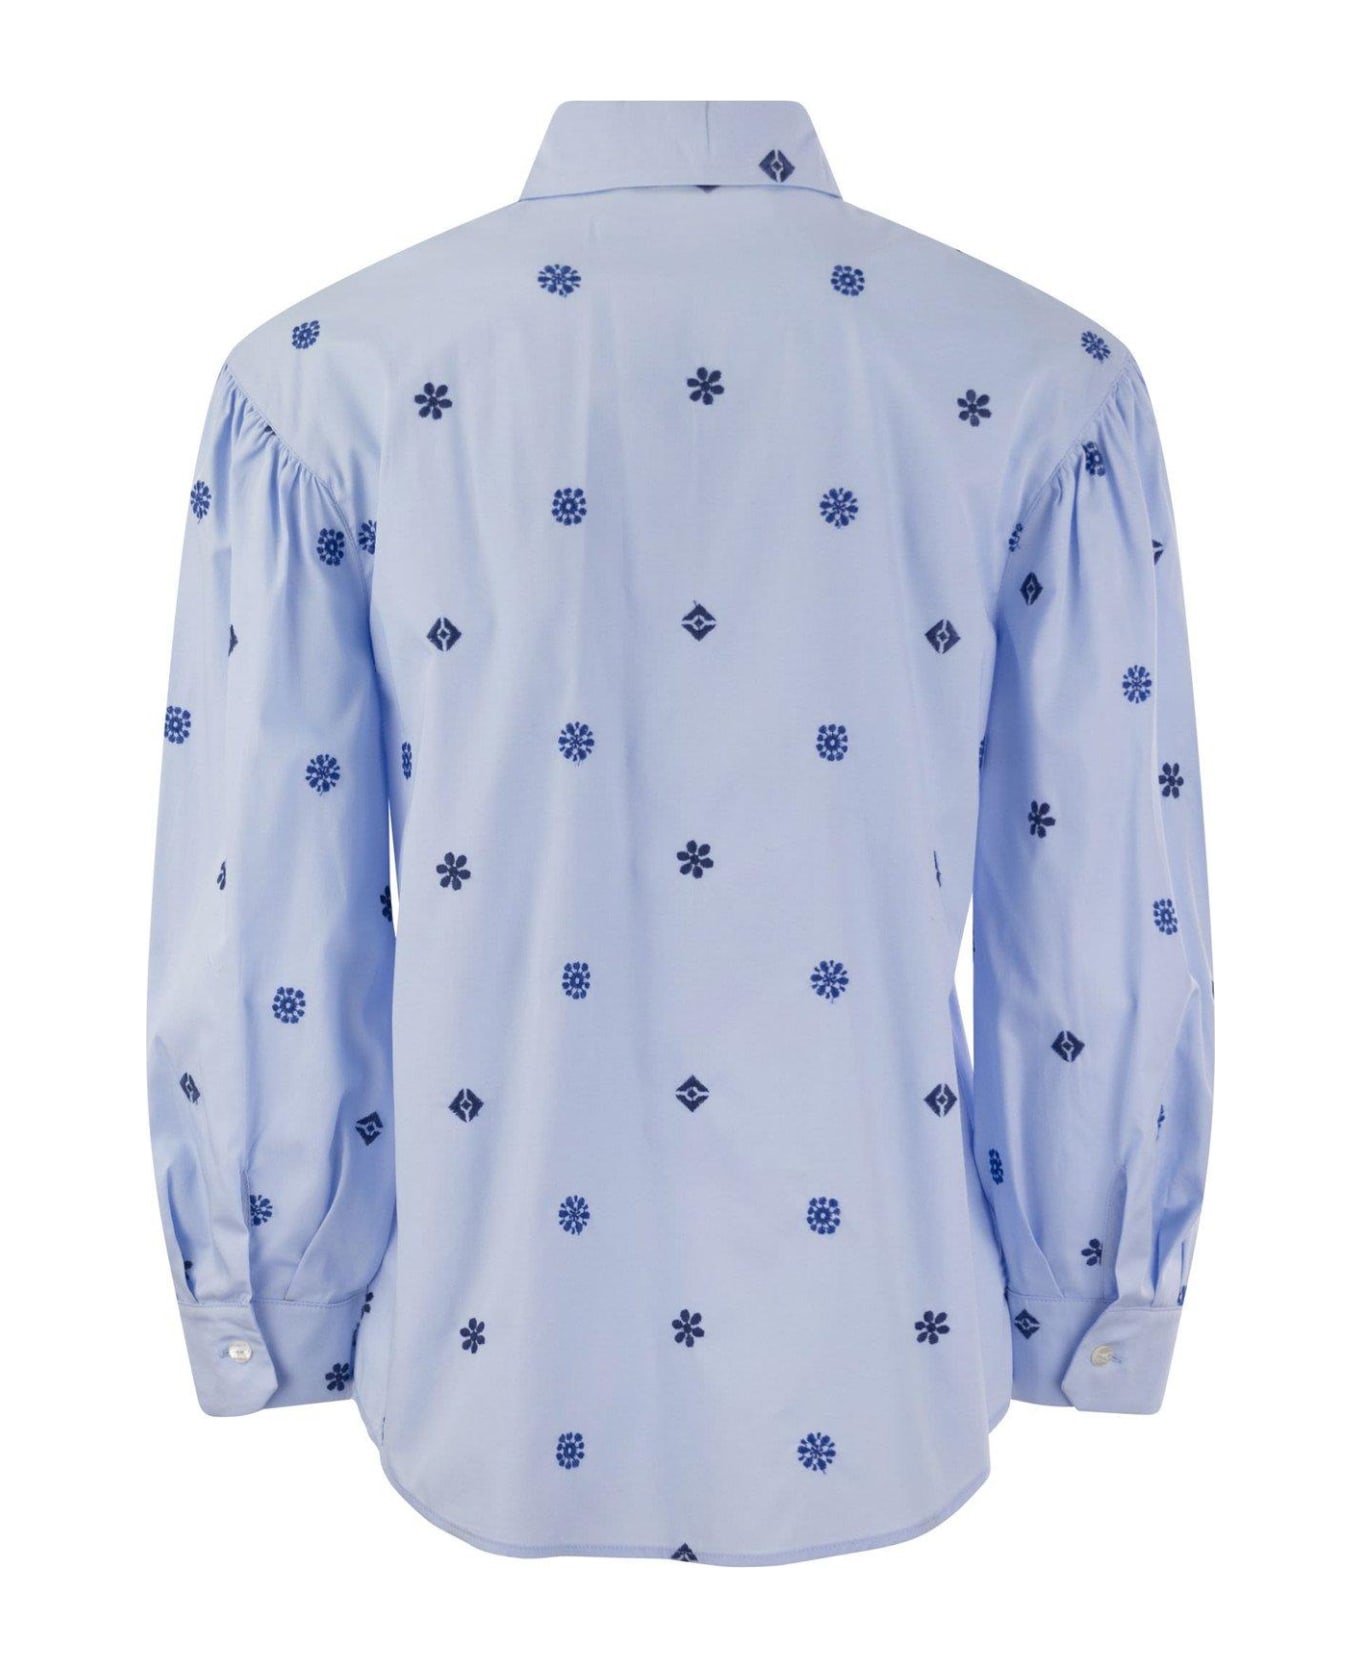 Weekend Max Mara All-over Patterned Long-sleeved Shirt - LIGHT BLUE シャツ